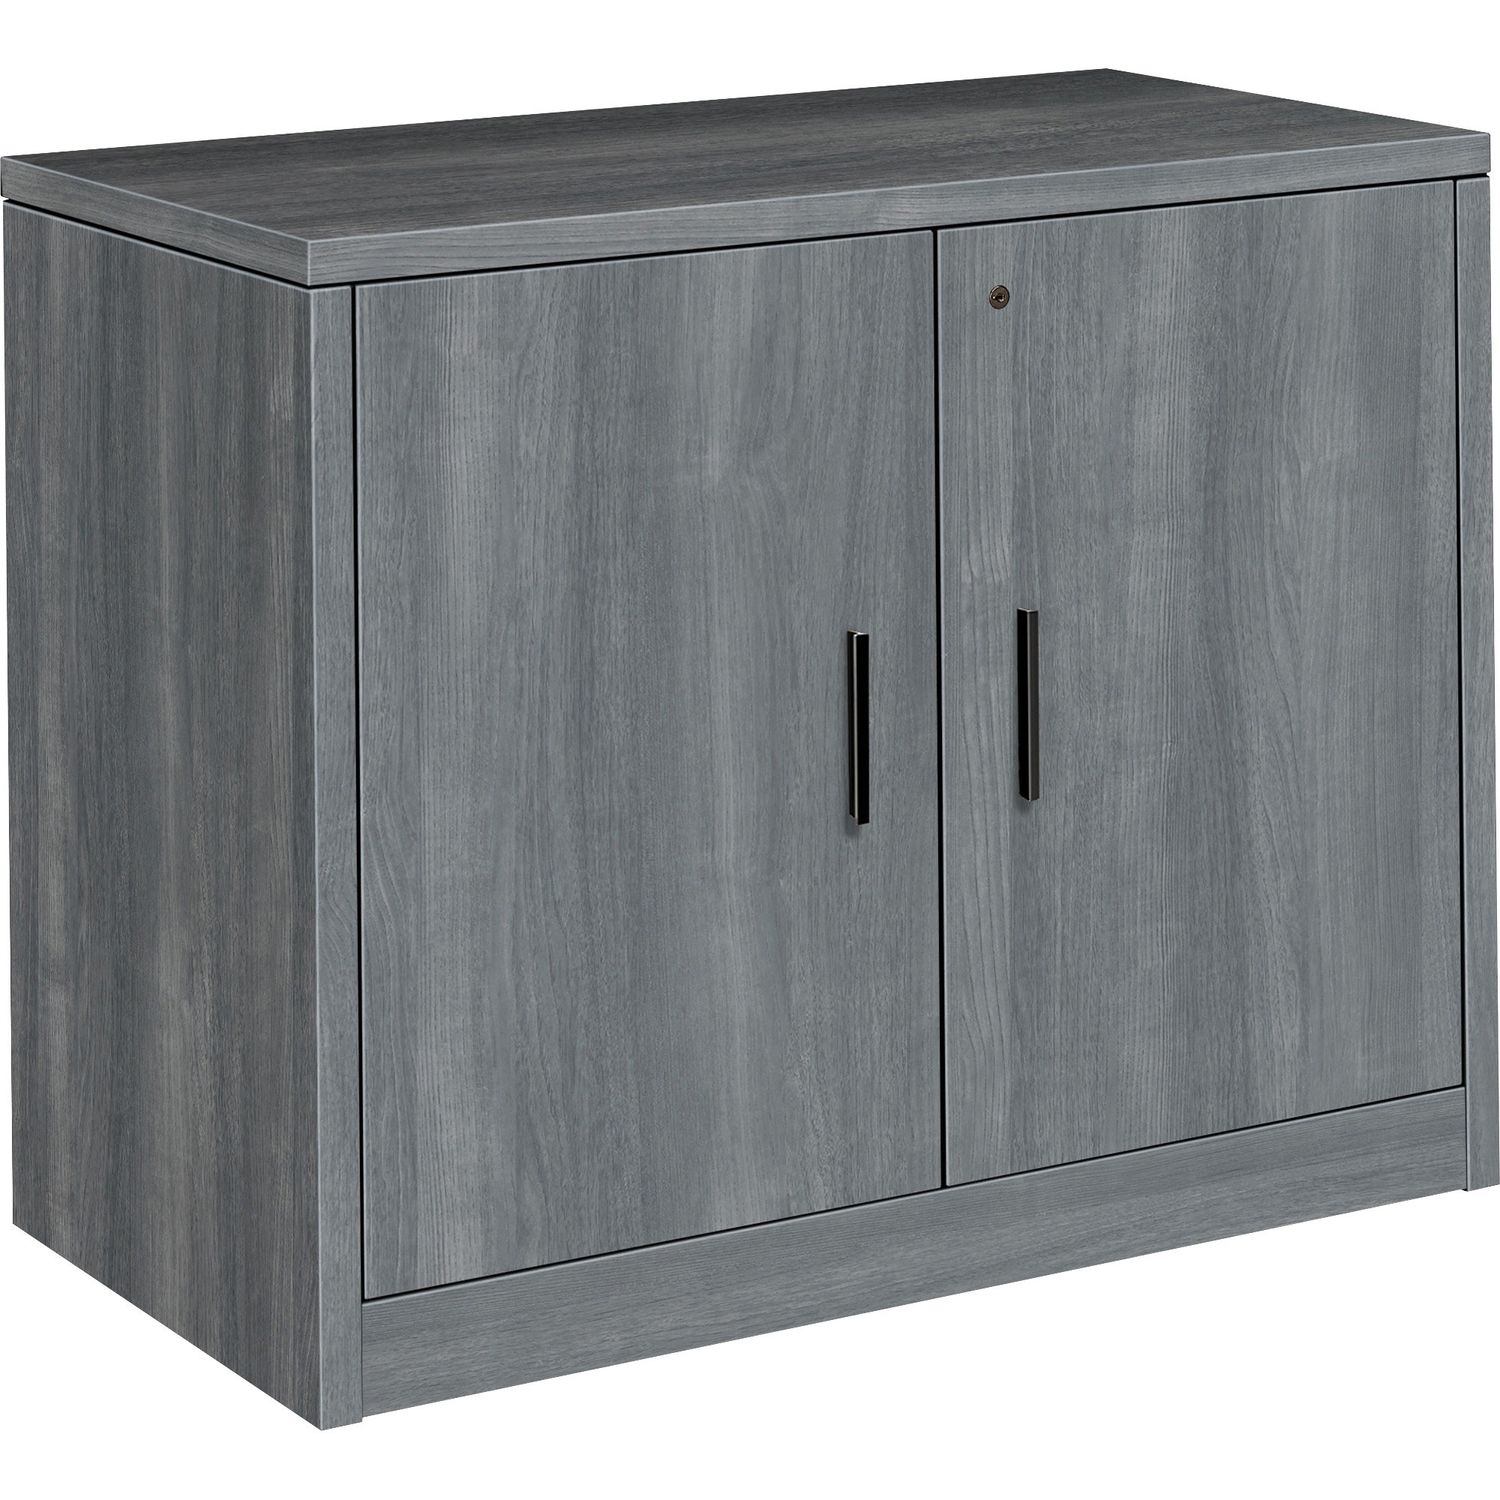 10500 Series Storage Cabinet 36" x 20" x 29.5", Drawer(s)2 Door(s), Square Edge, Material: Thermofused Laminate (TFL), Finish: Sterling Ash Laminate